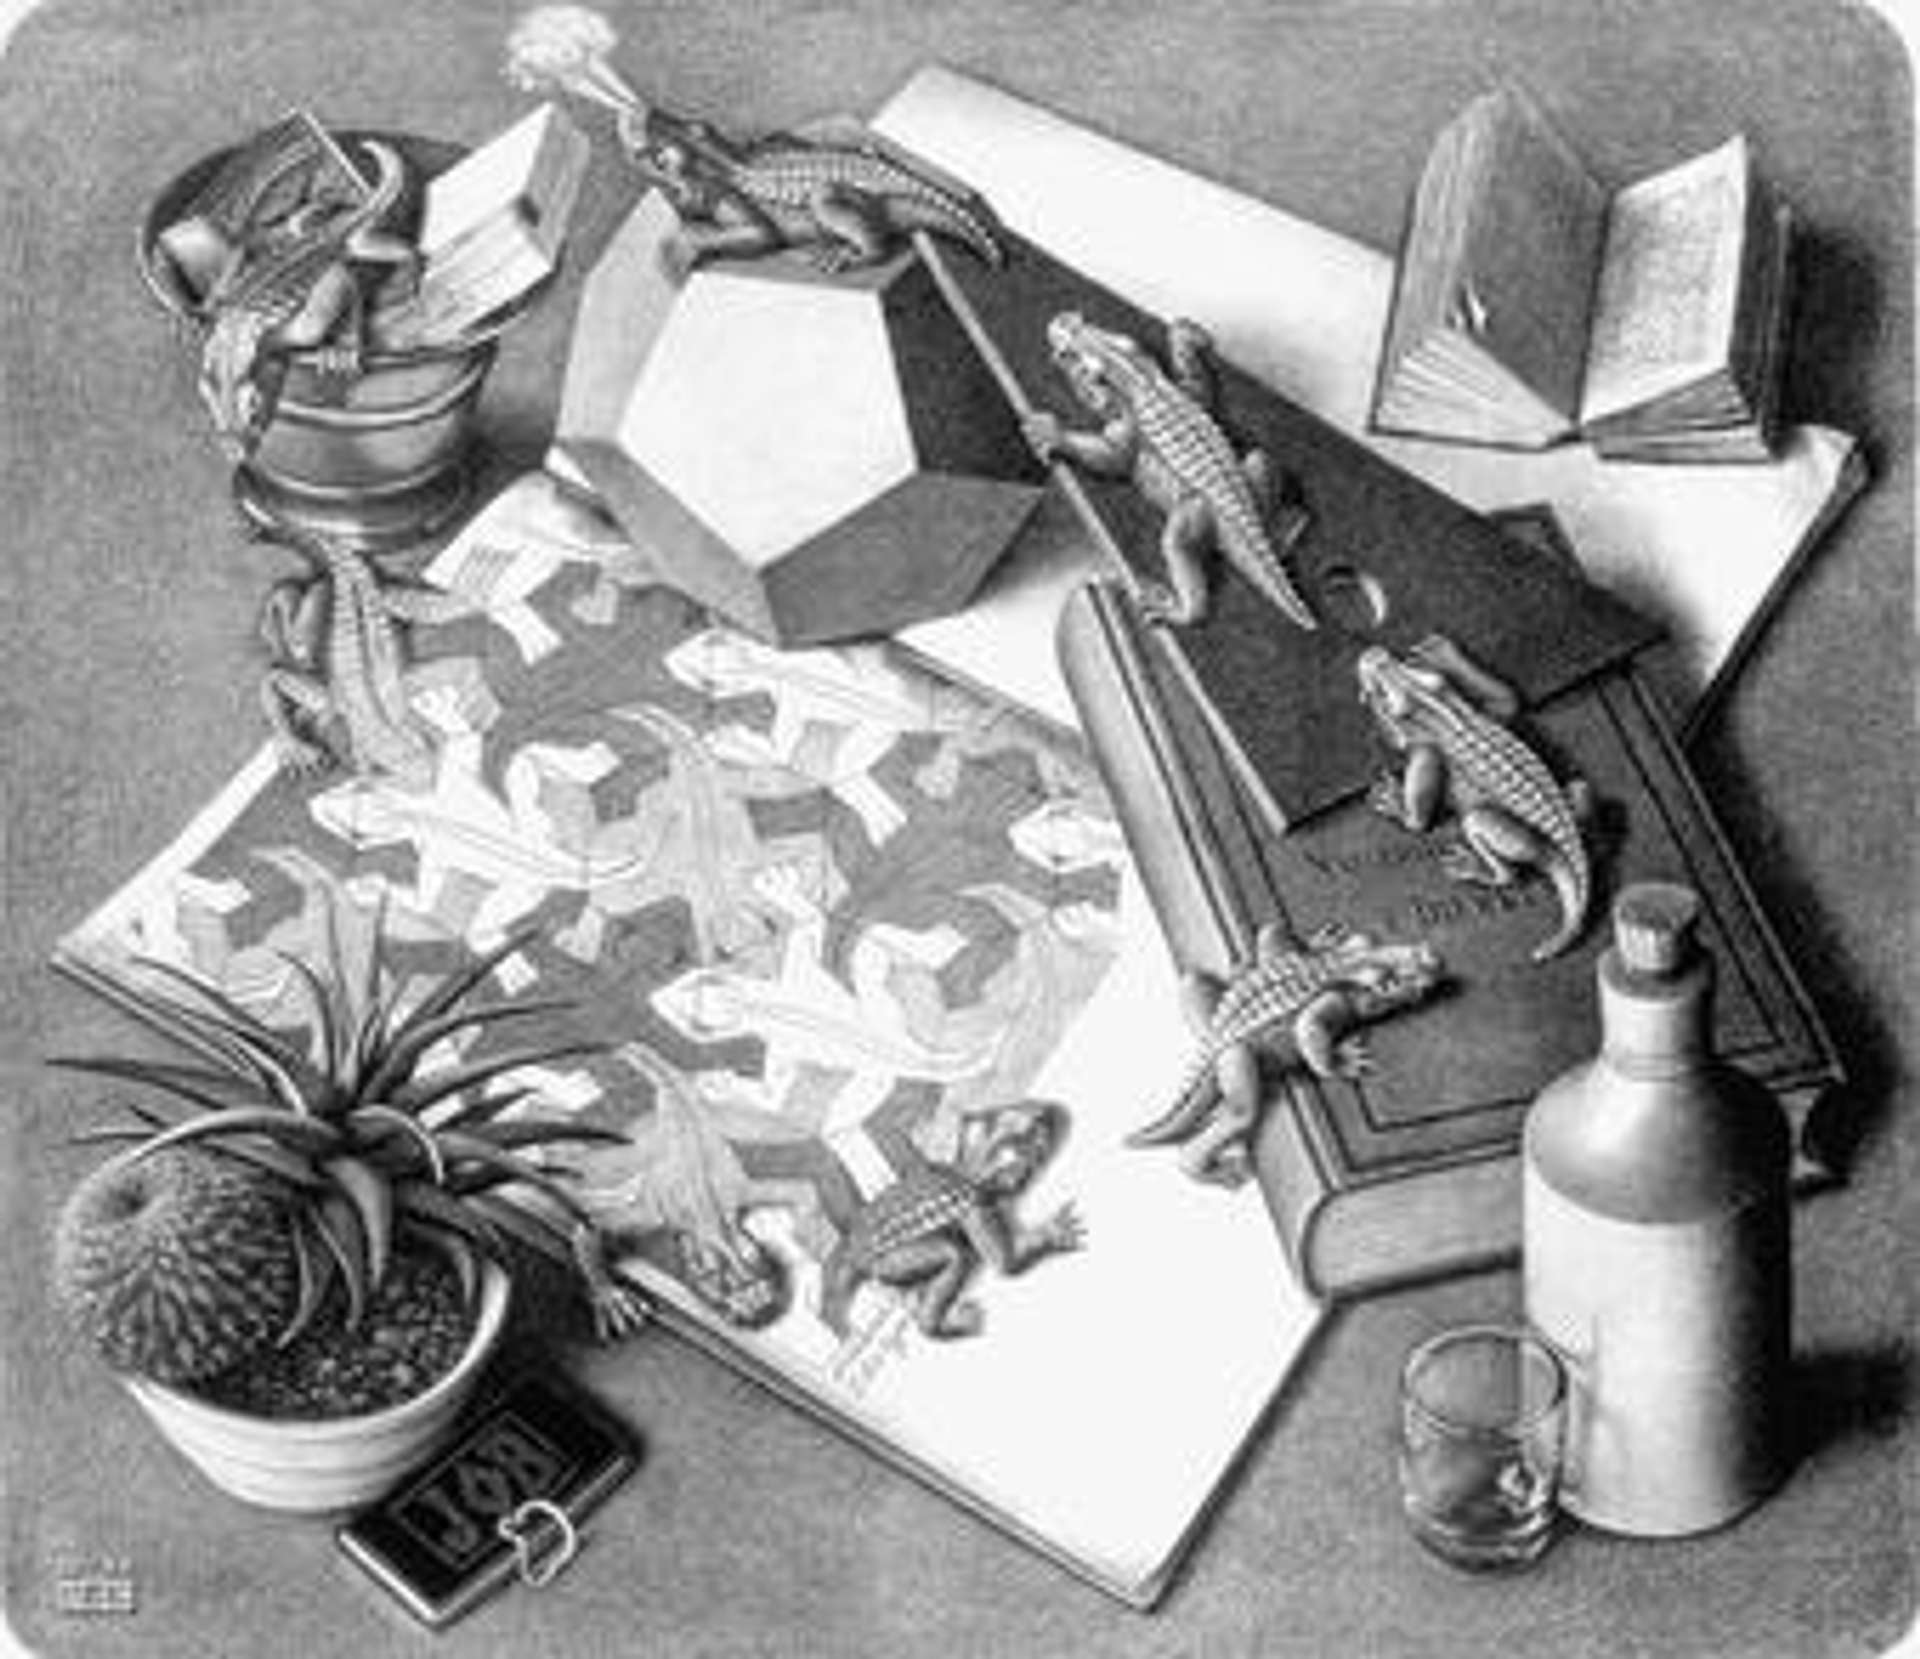 Reptiles by M. C. Escher. The print is a still life, featuring an open sketchbook, cacti, books and lizards.